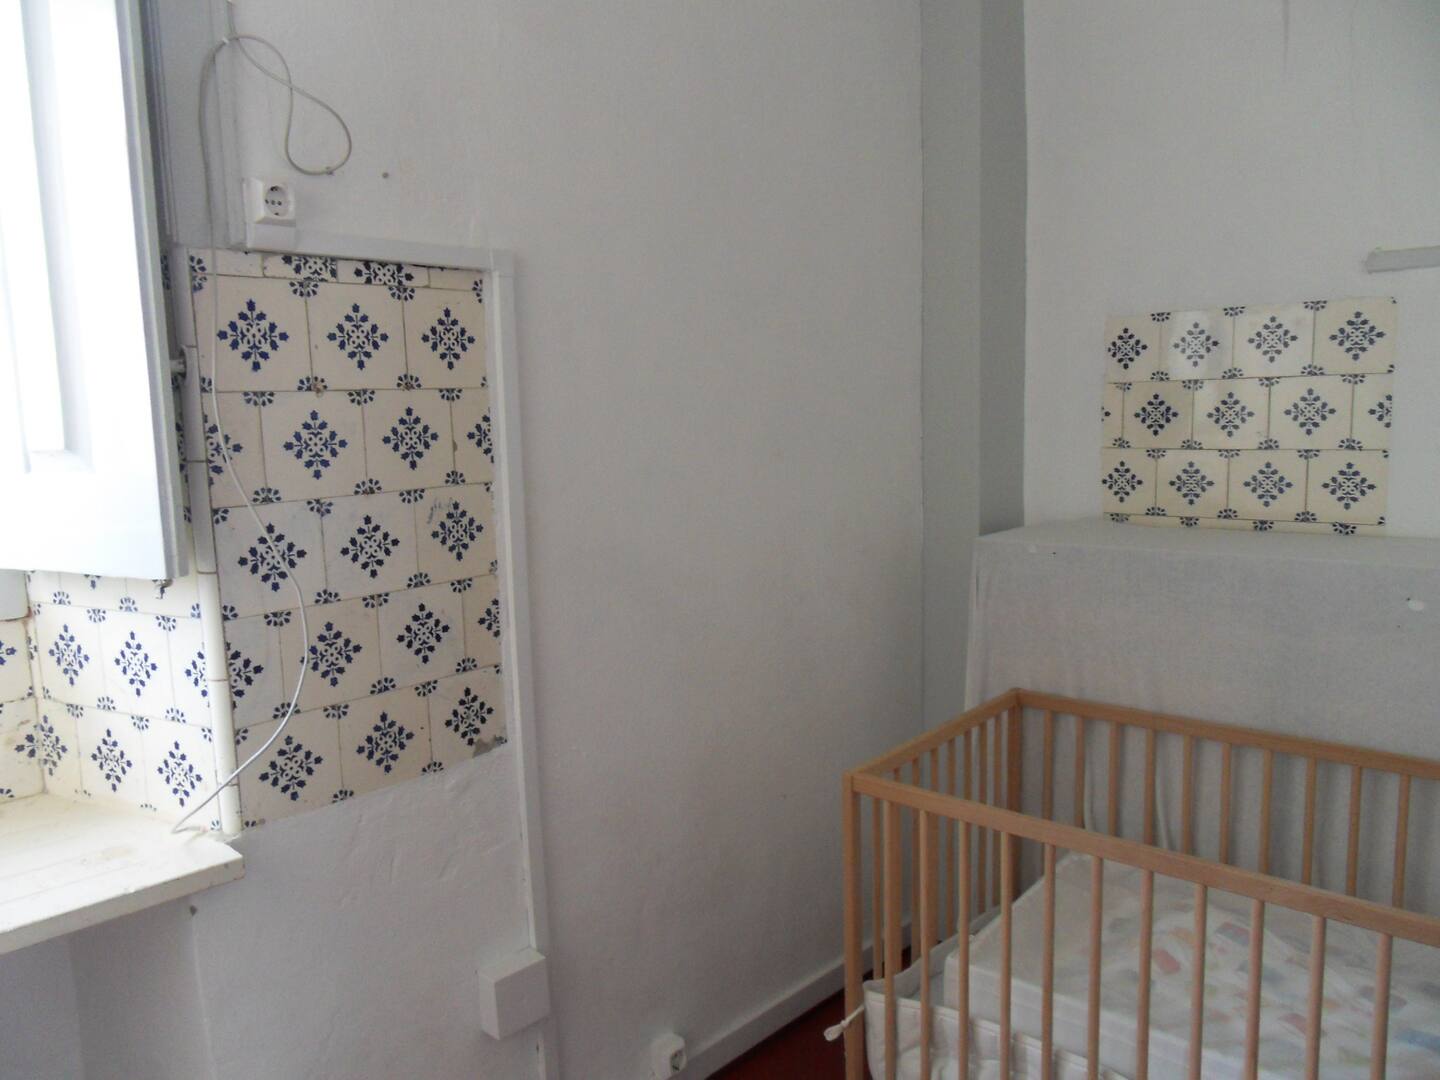 Tiled room upstairs, small double bed or a babybed.